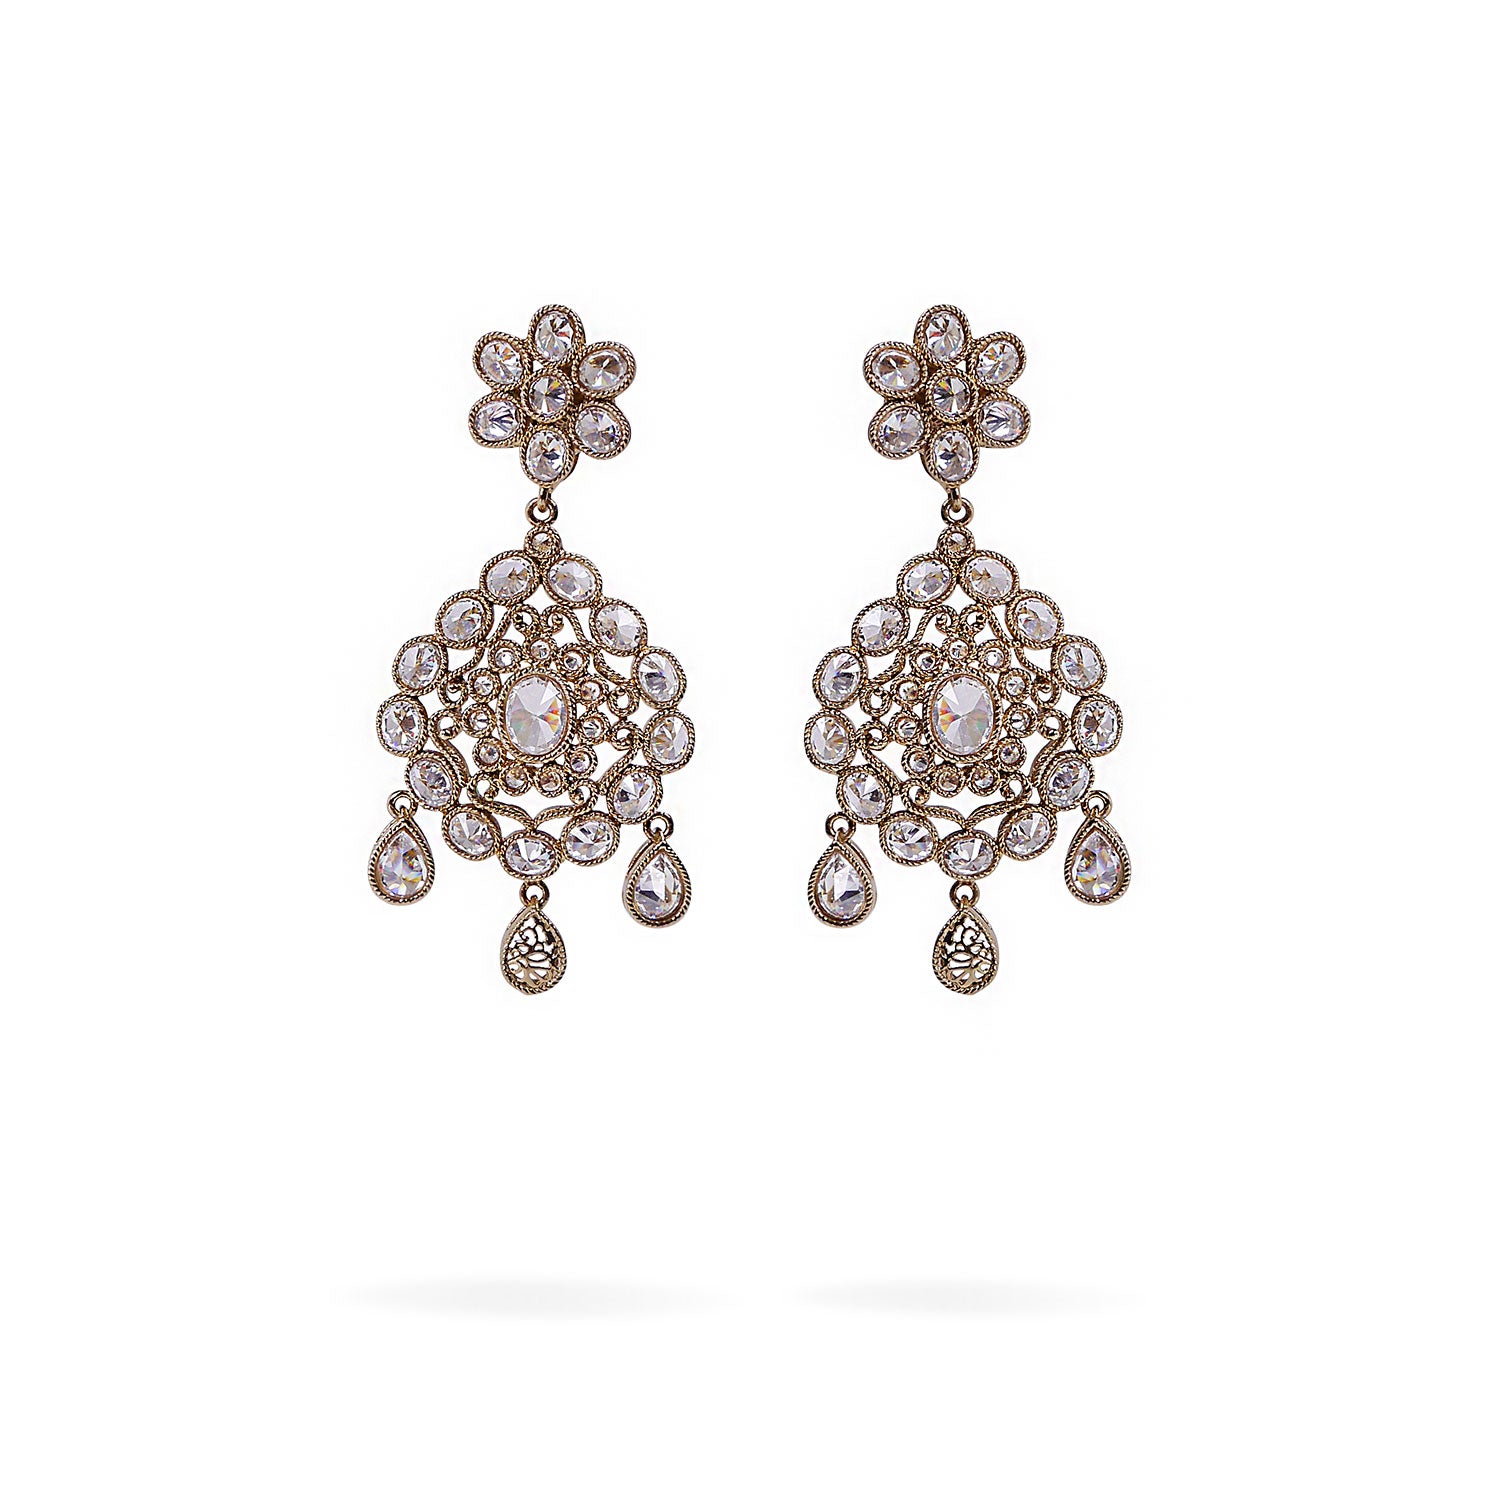 Riana Crystal Earrings in Antique Gold